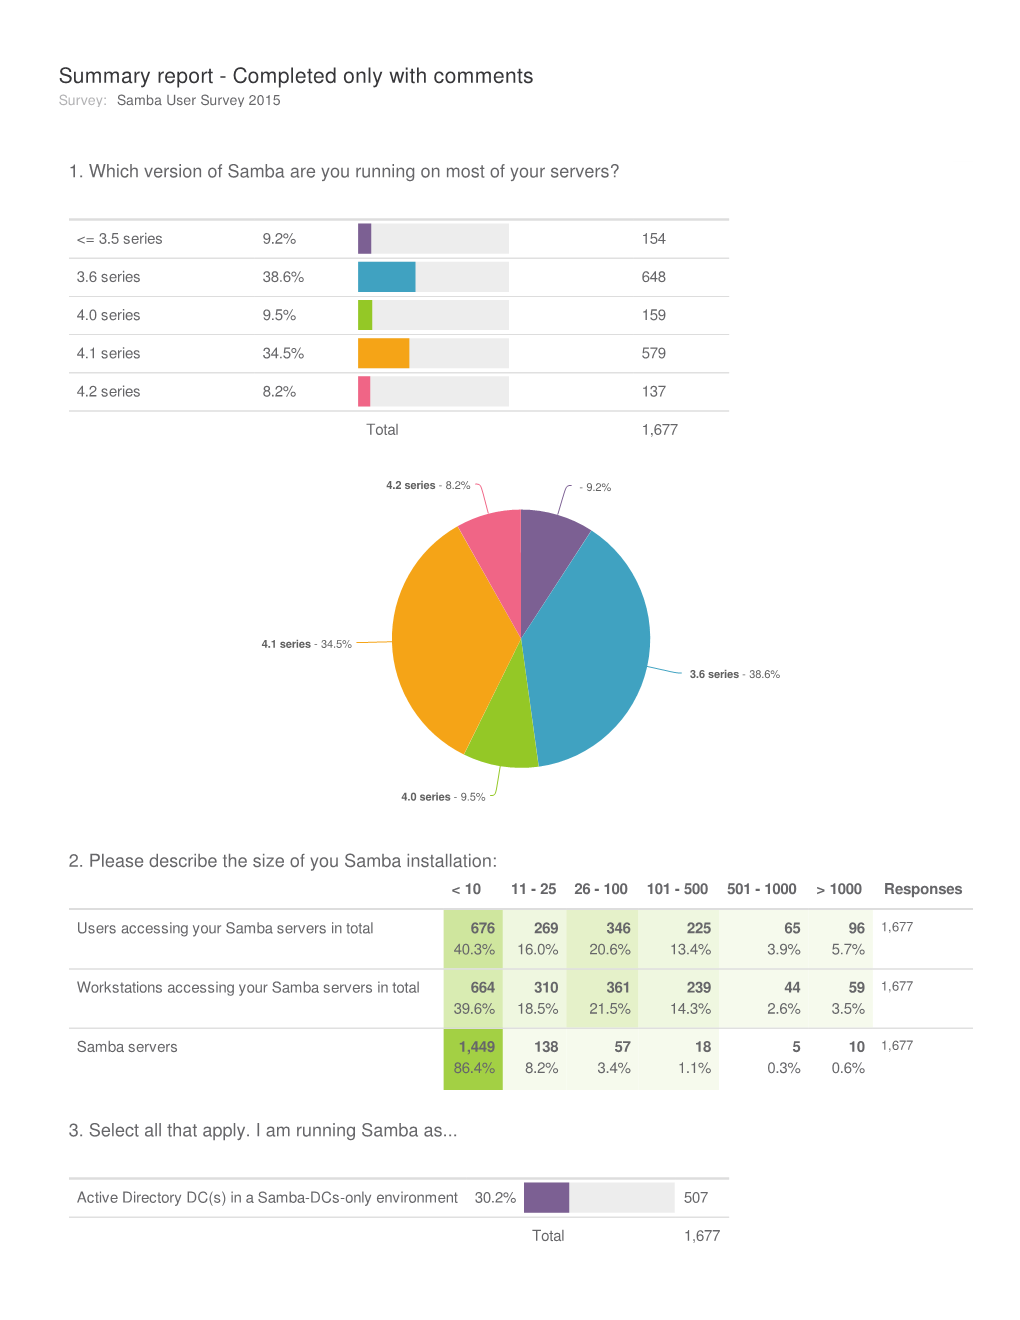 Summary Report - Completed Only with Comments Survey: Samba User Survey 2015